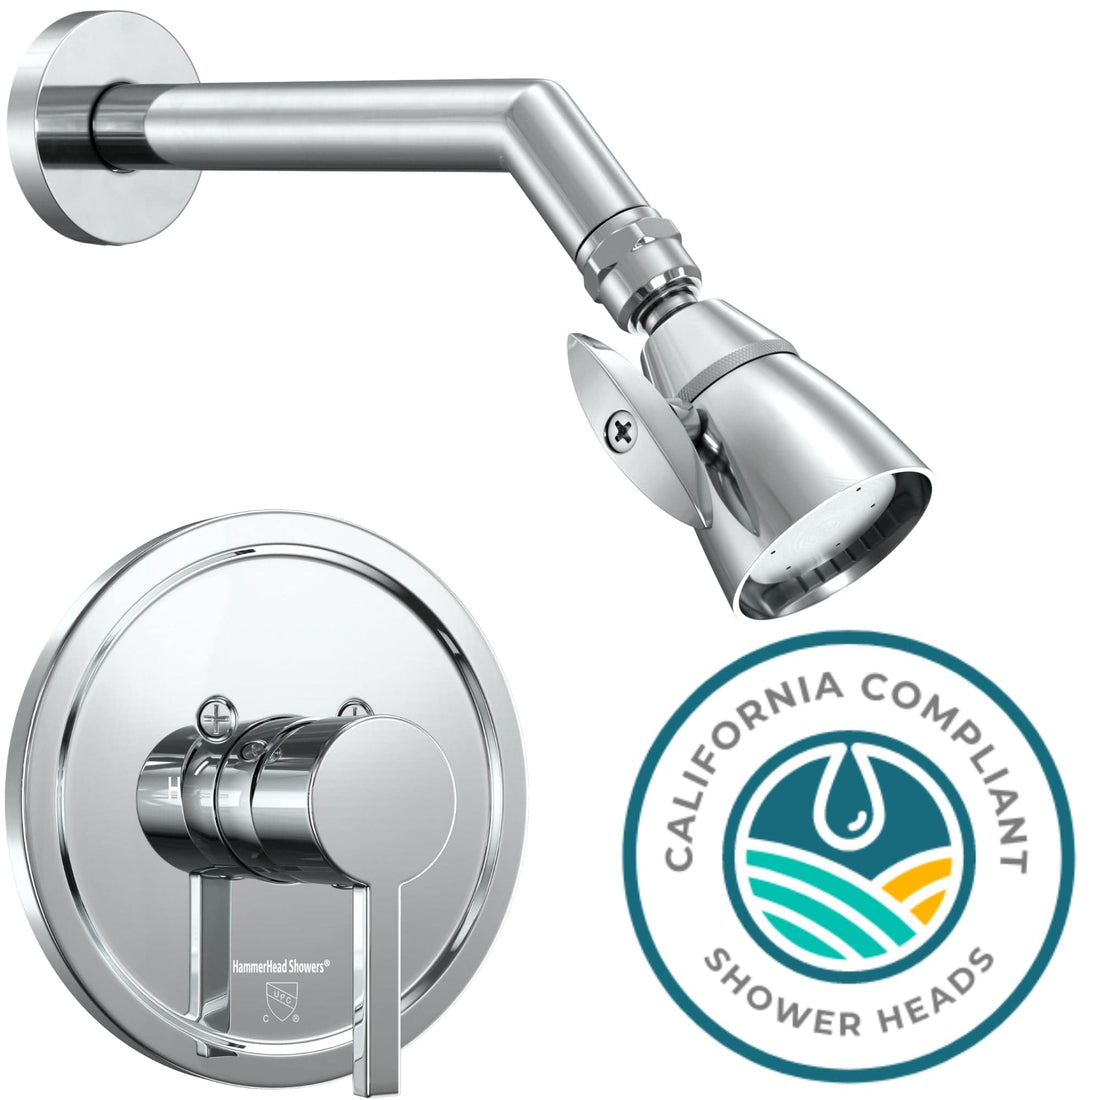 Main Image All Metal 2-Inch High Pressure Shower Head Set - Complete Shower System with Valve and Trim Chrome / 1.75 - The Shower Head Store